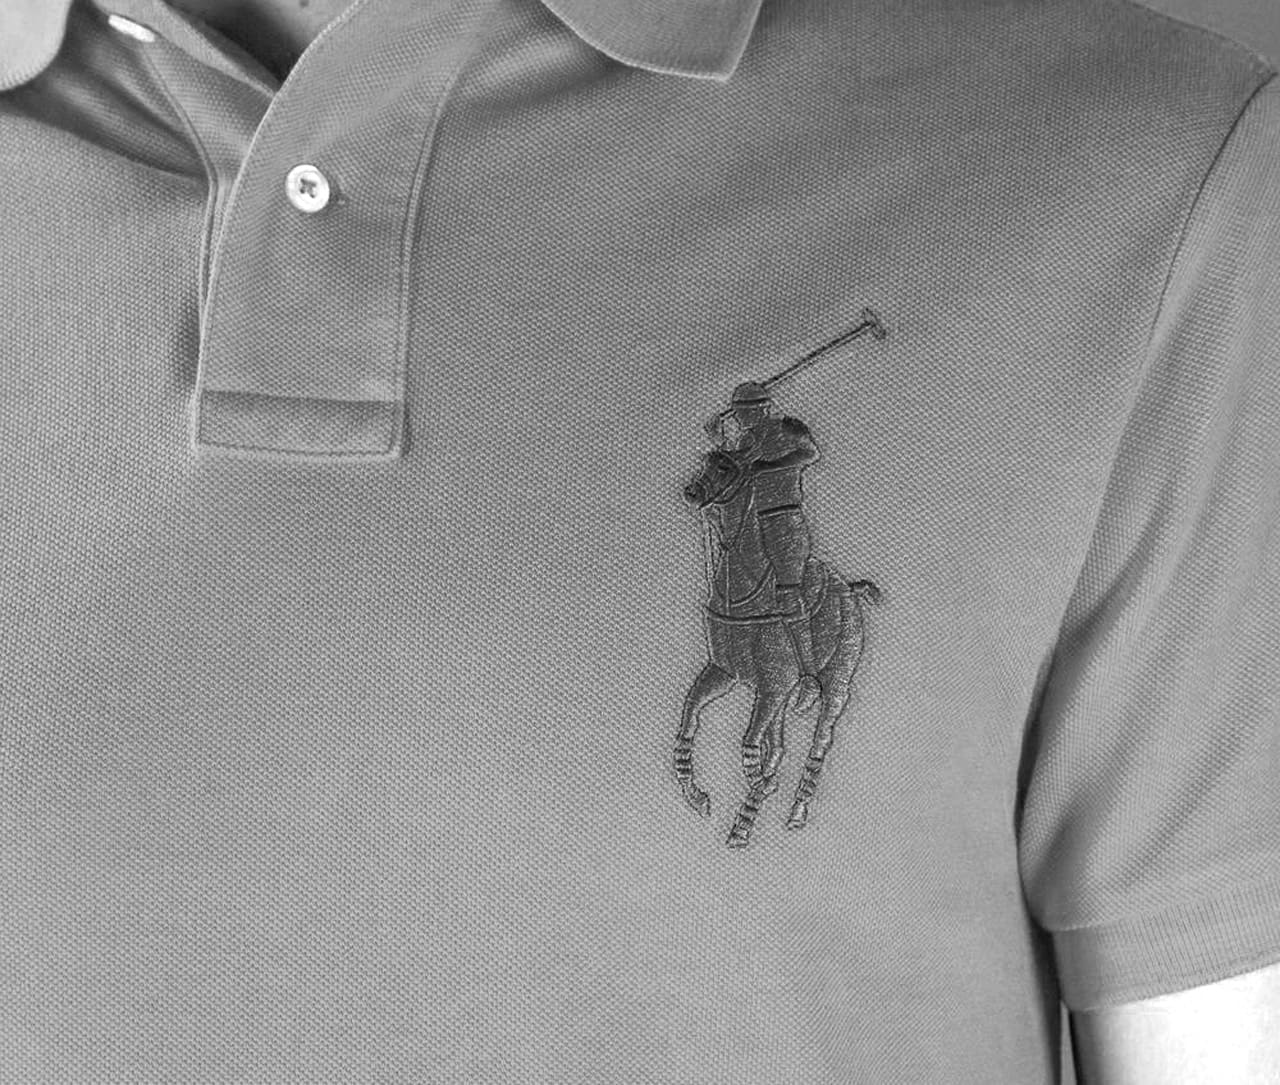 Image of Ralph Lauren's Polo logo embroidered on a shirt